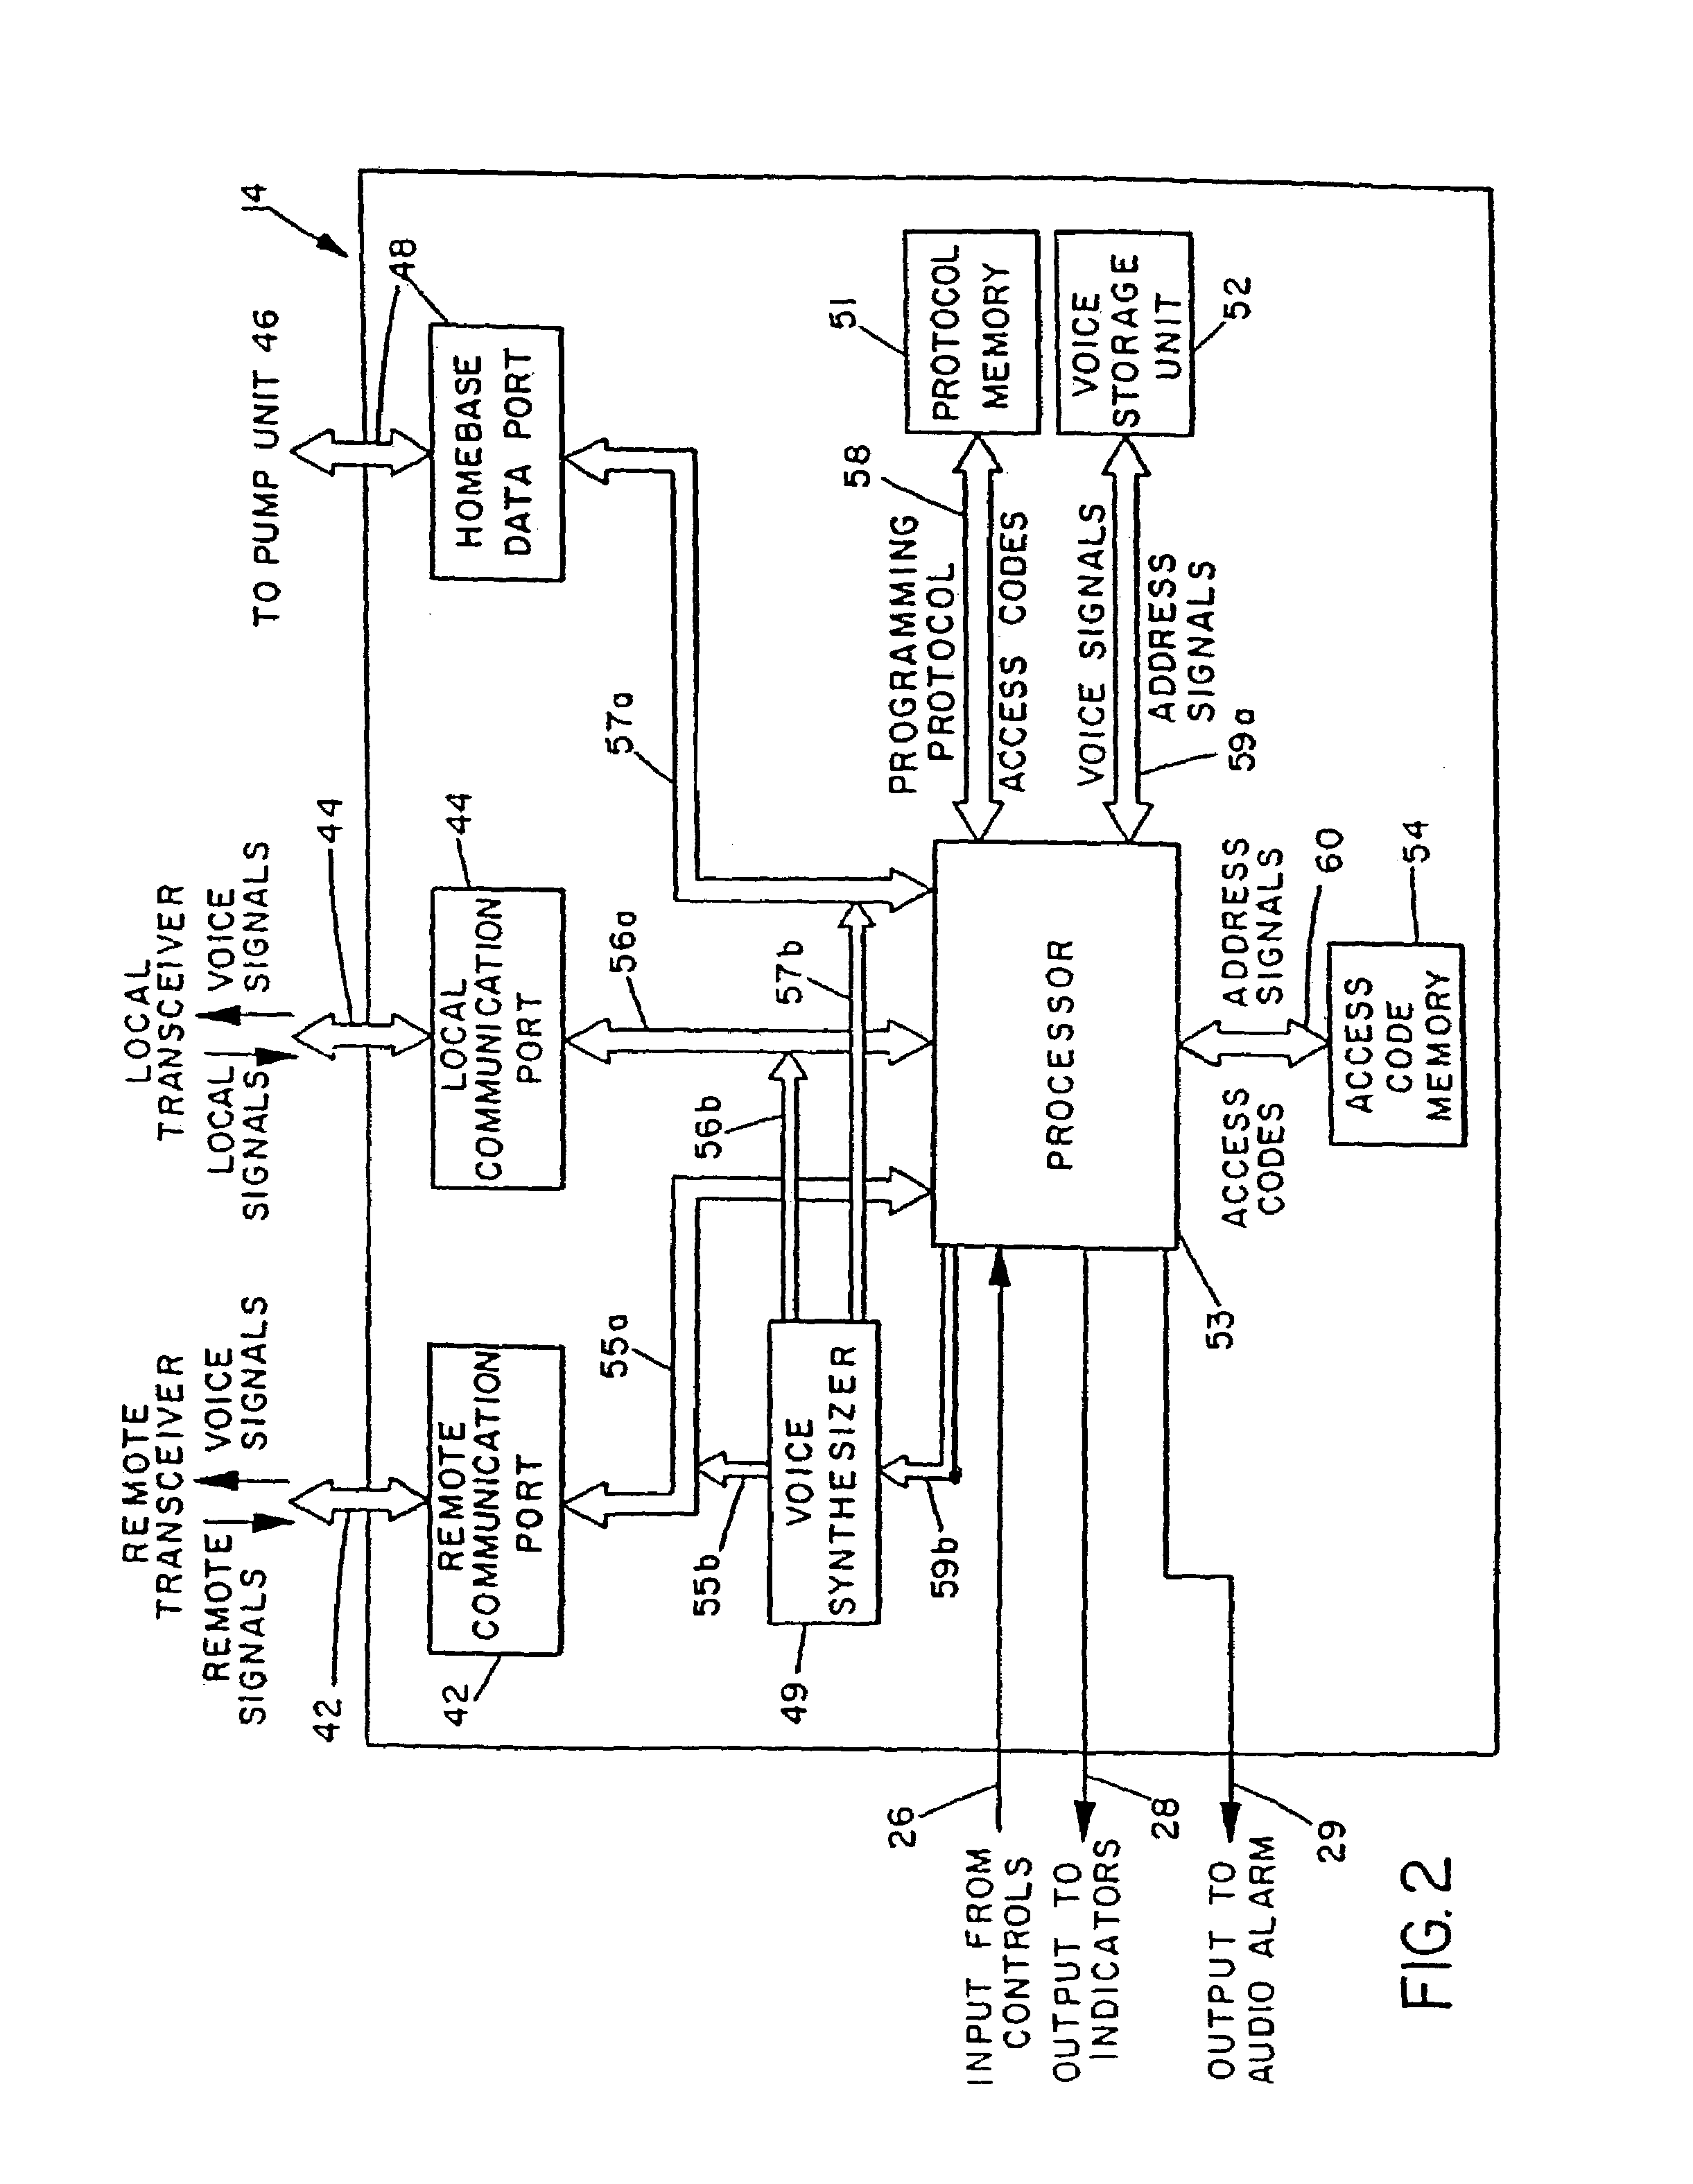 Remotely programmable infusion system